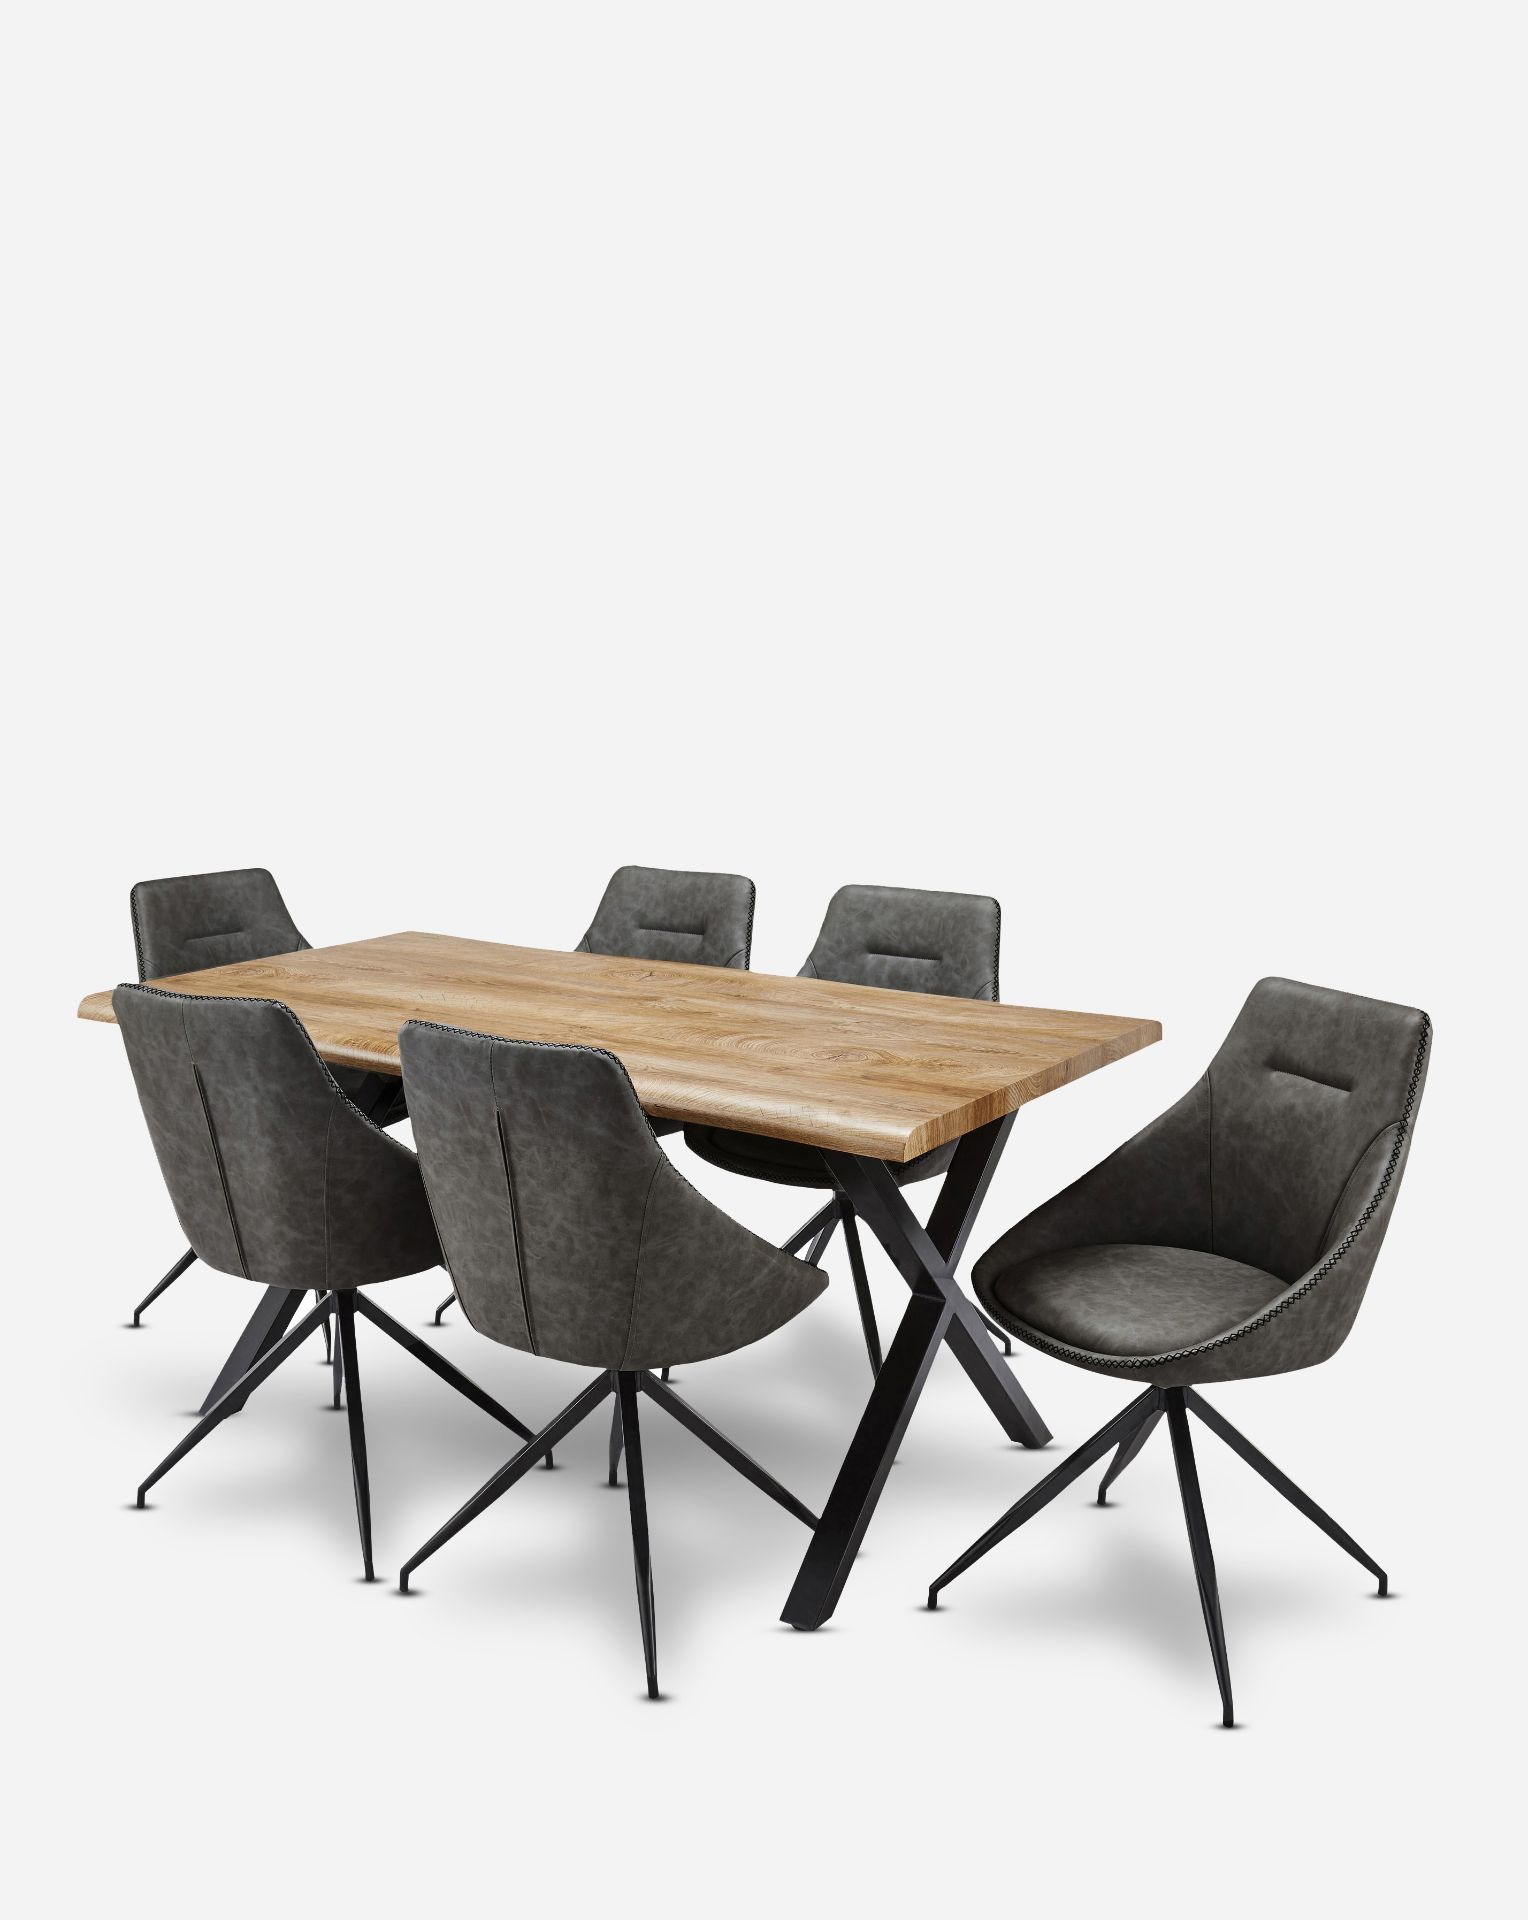 BRAND NEW KARTER Large Dining Table and 6 Chairs - GREY/OAK. RRP £1399. The Karter Large Dining - Image 5 of 5